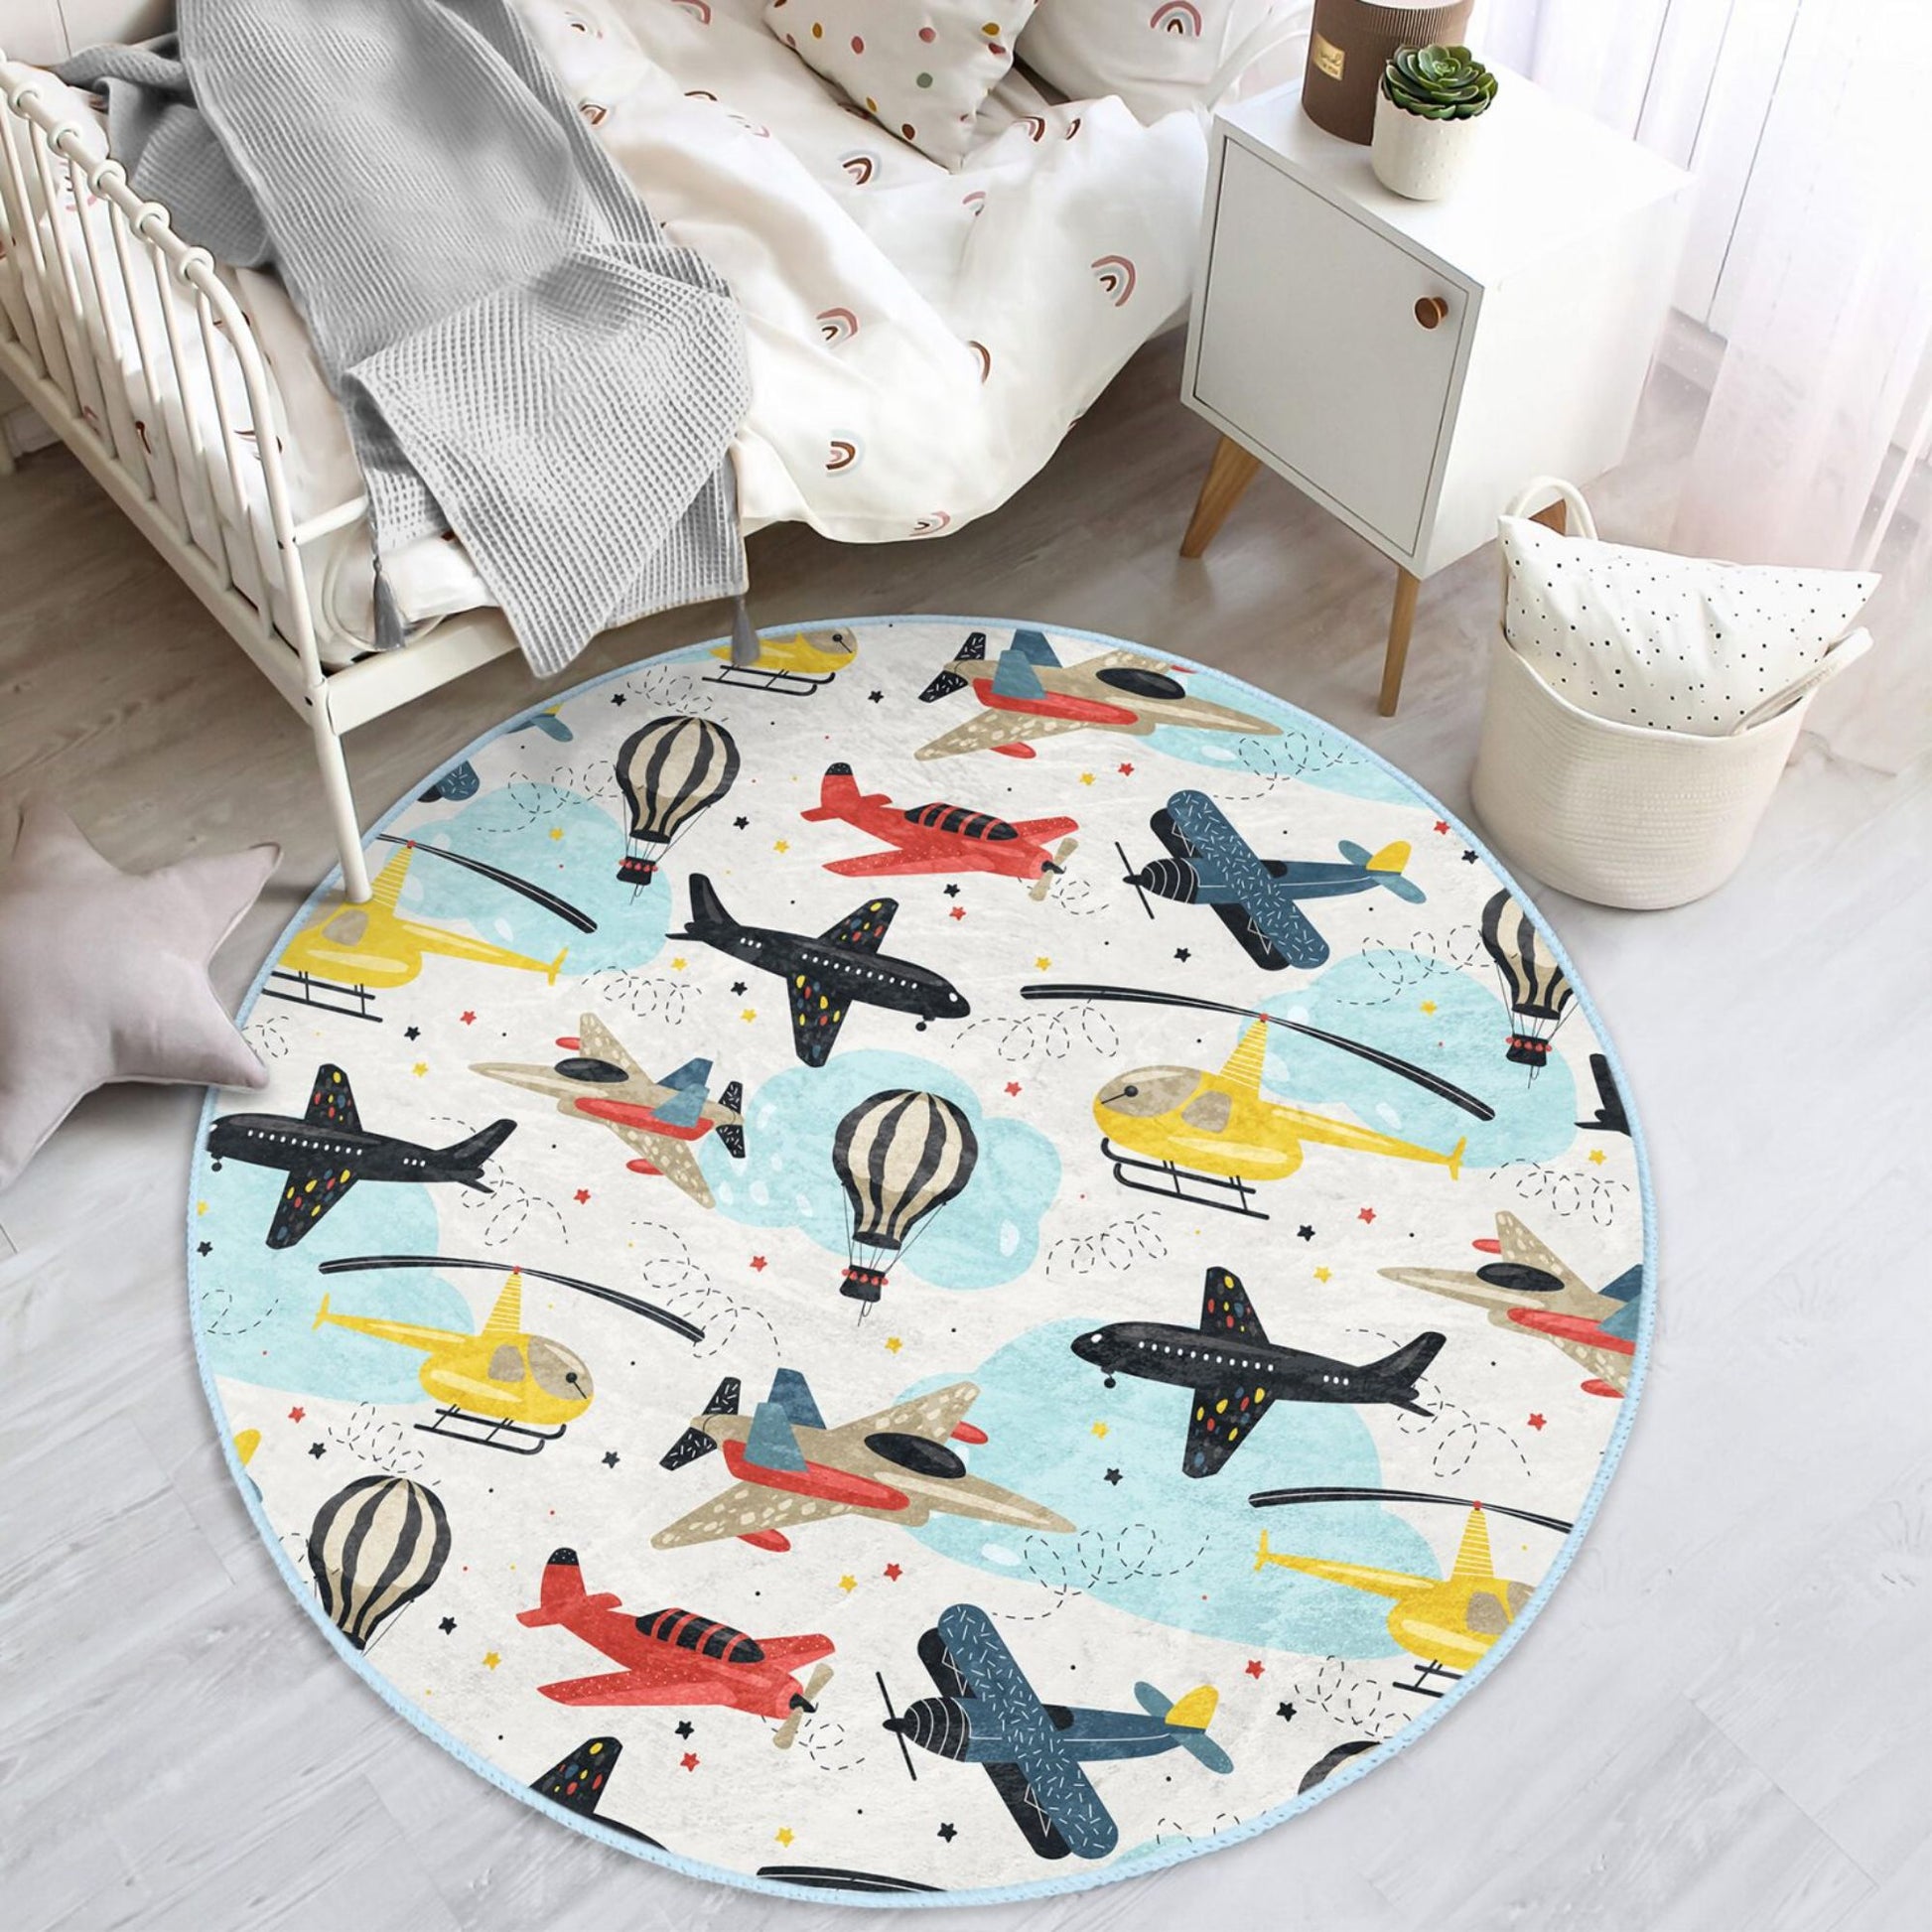 Educational Rug with Planes and Helicopters Design